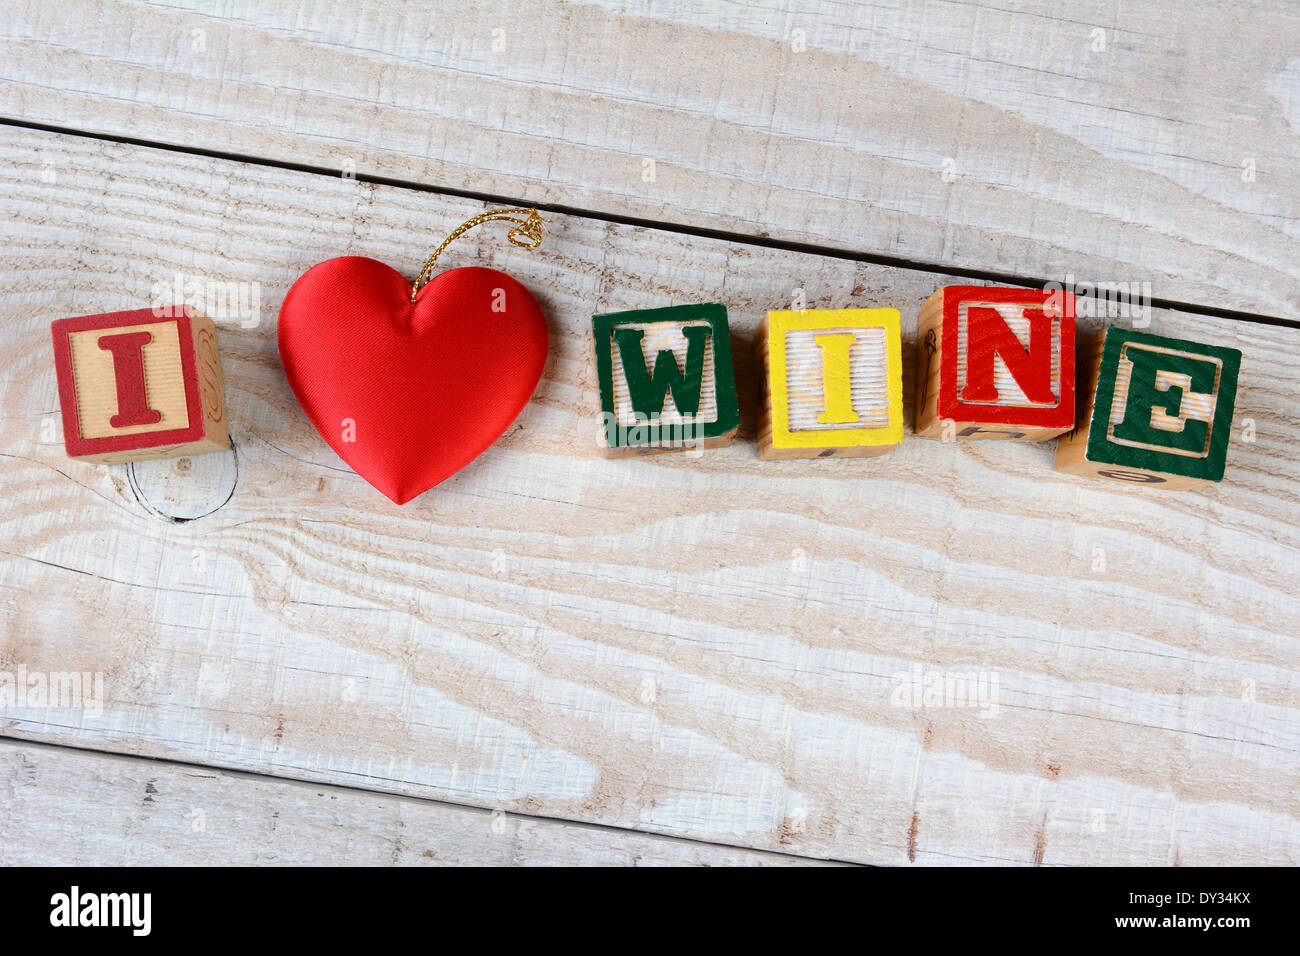 Childrens Blocks Spelling Out I Love Wine. The word Love being represented by a red heart. Stock Photo